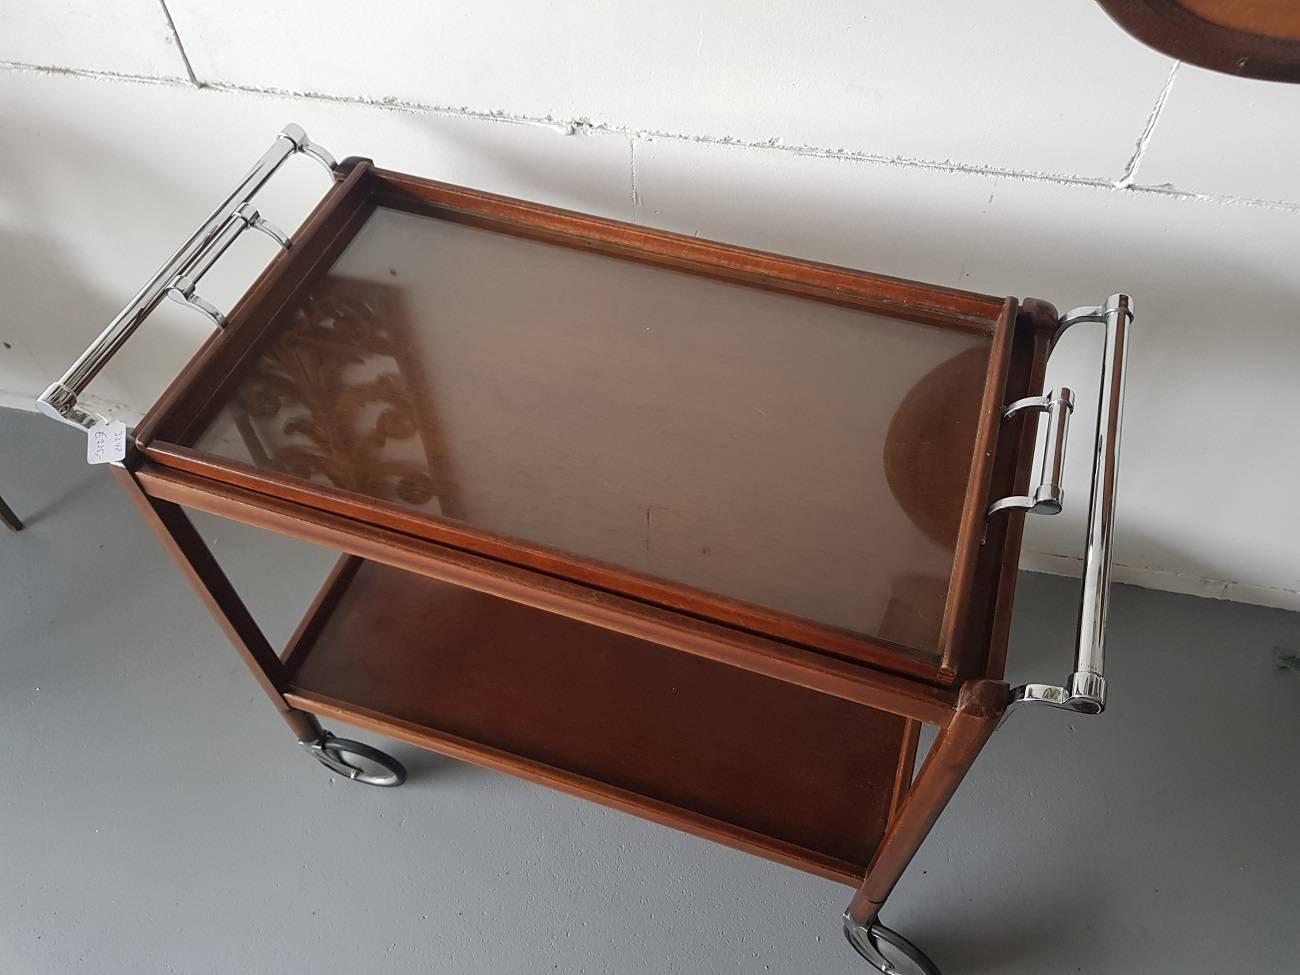 French Vintage serving table from the 1960’s with chrome handles and portable tray with glass bottom. In a good condition with some scratches on the glass and wear consistent with age and use.

The measurements are,
Depth 42,5 cm/ 16.7 inch.
Width